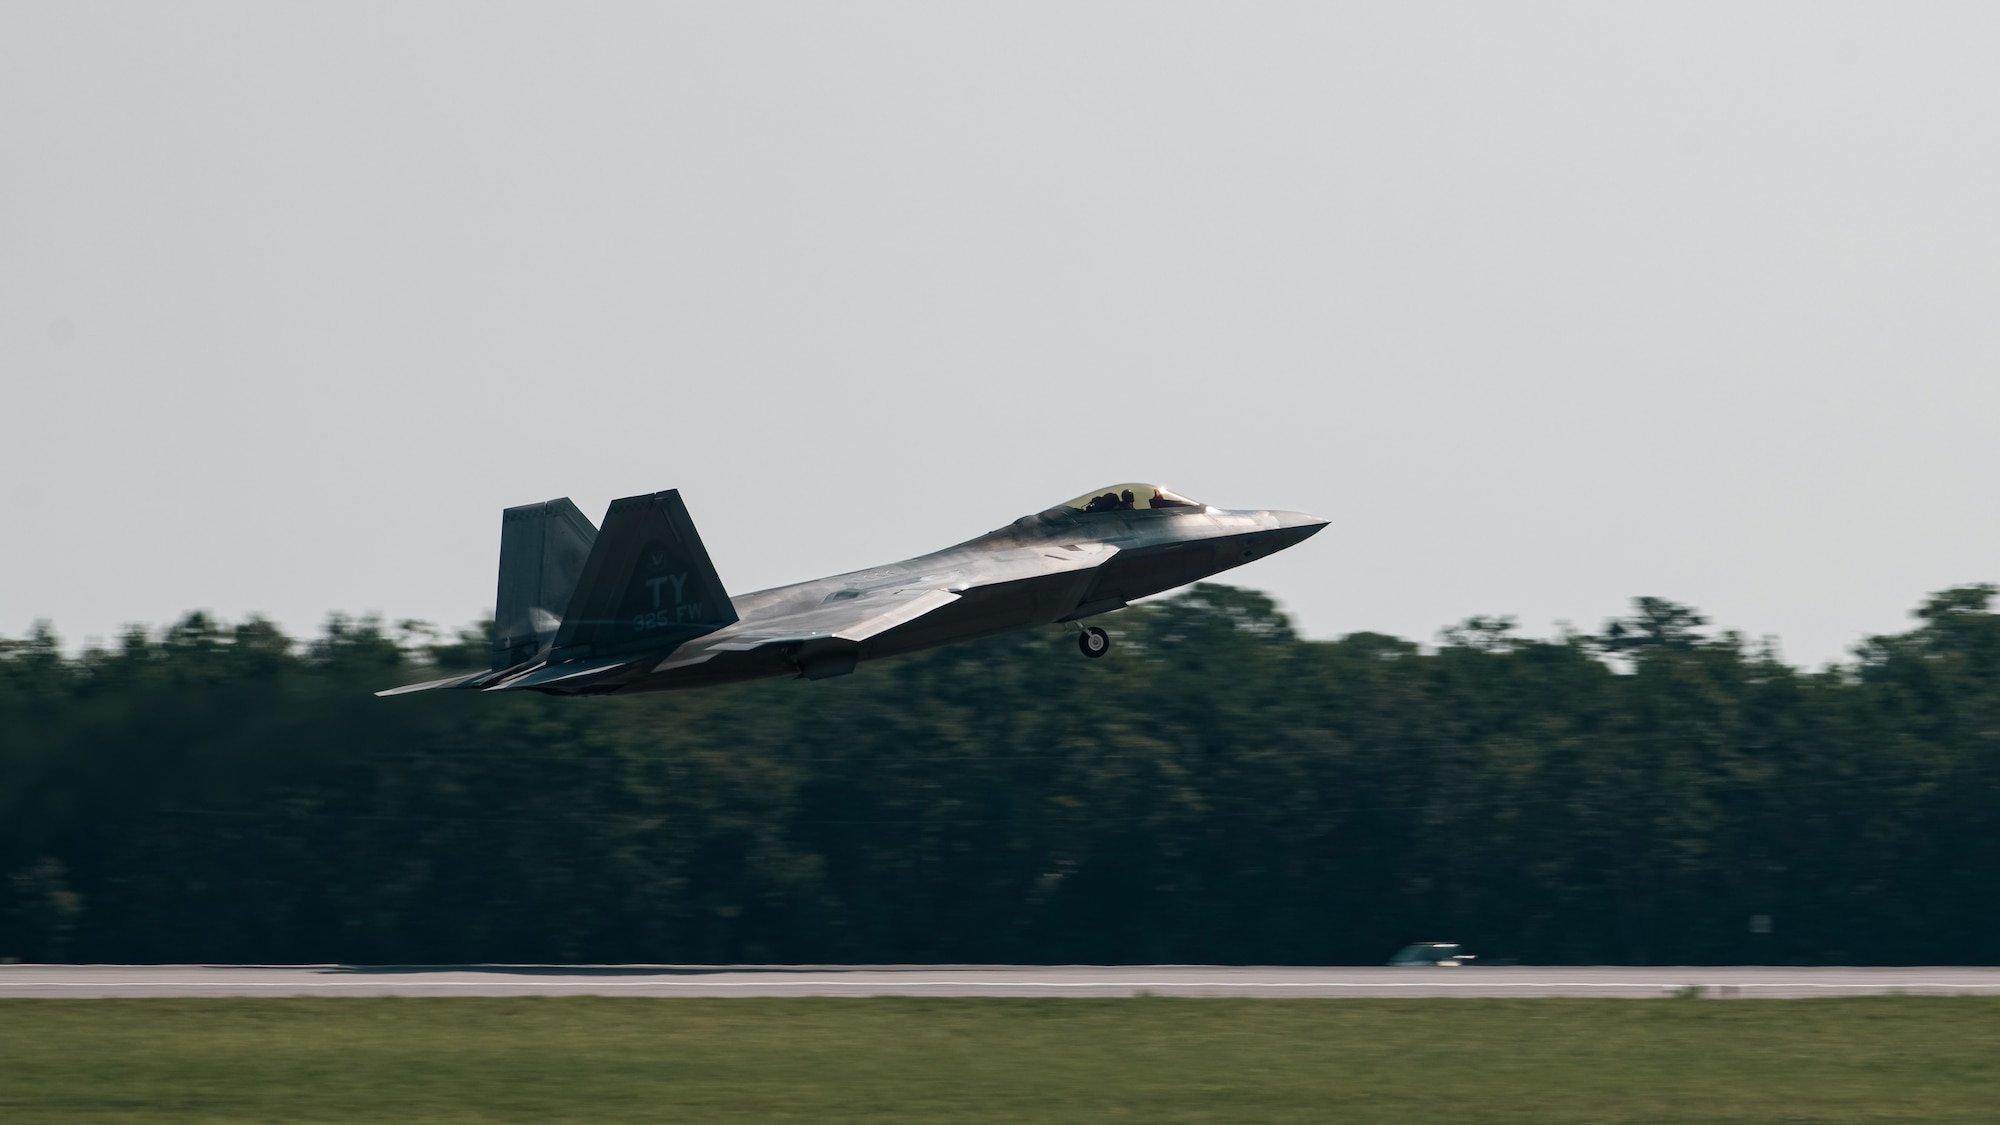 An F-22 Raptor takes off.